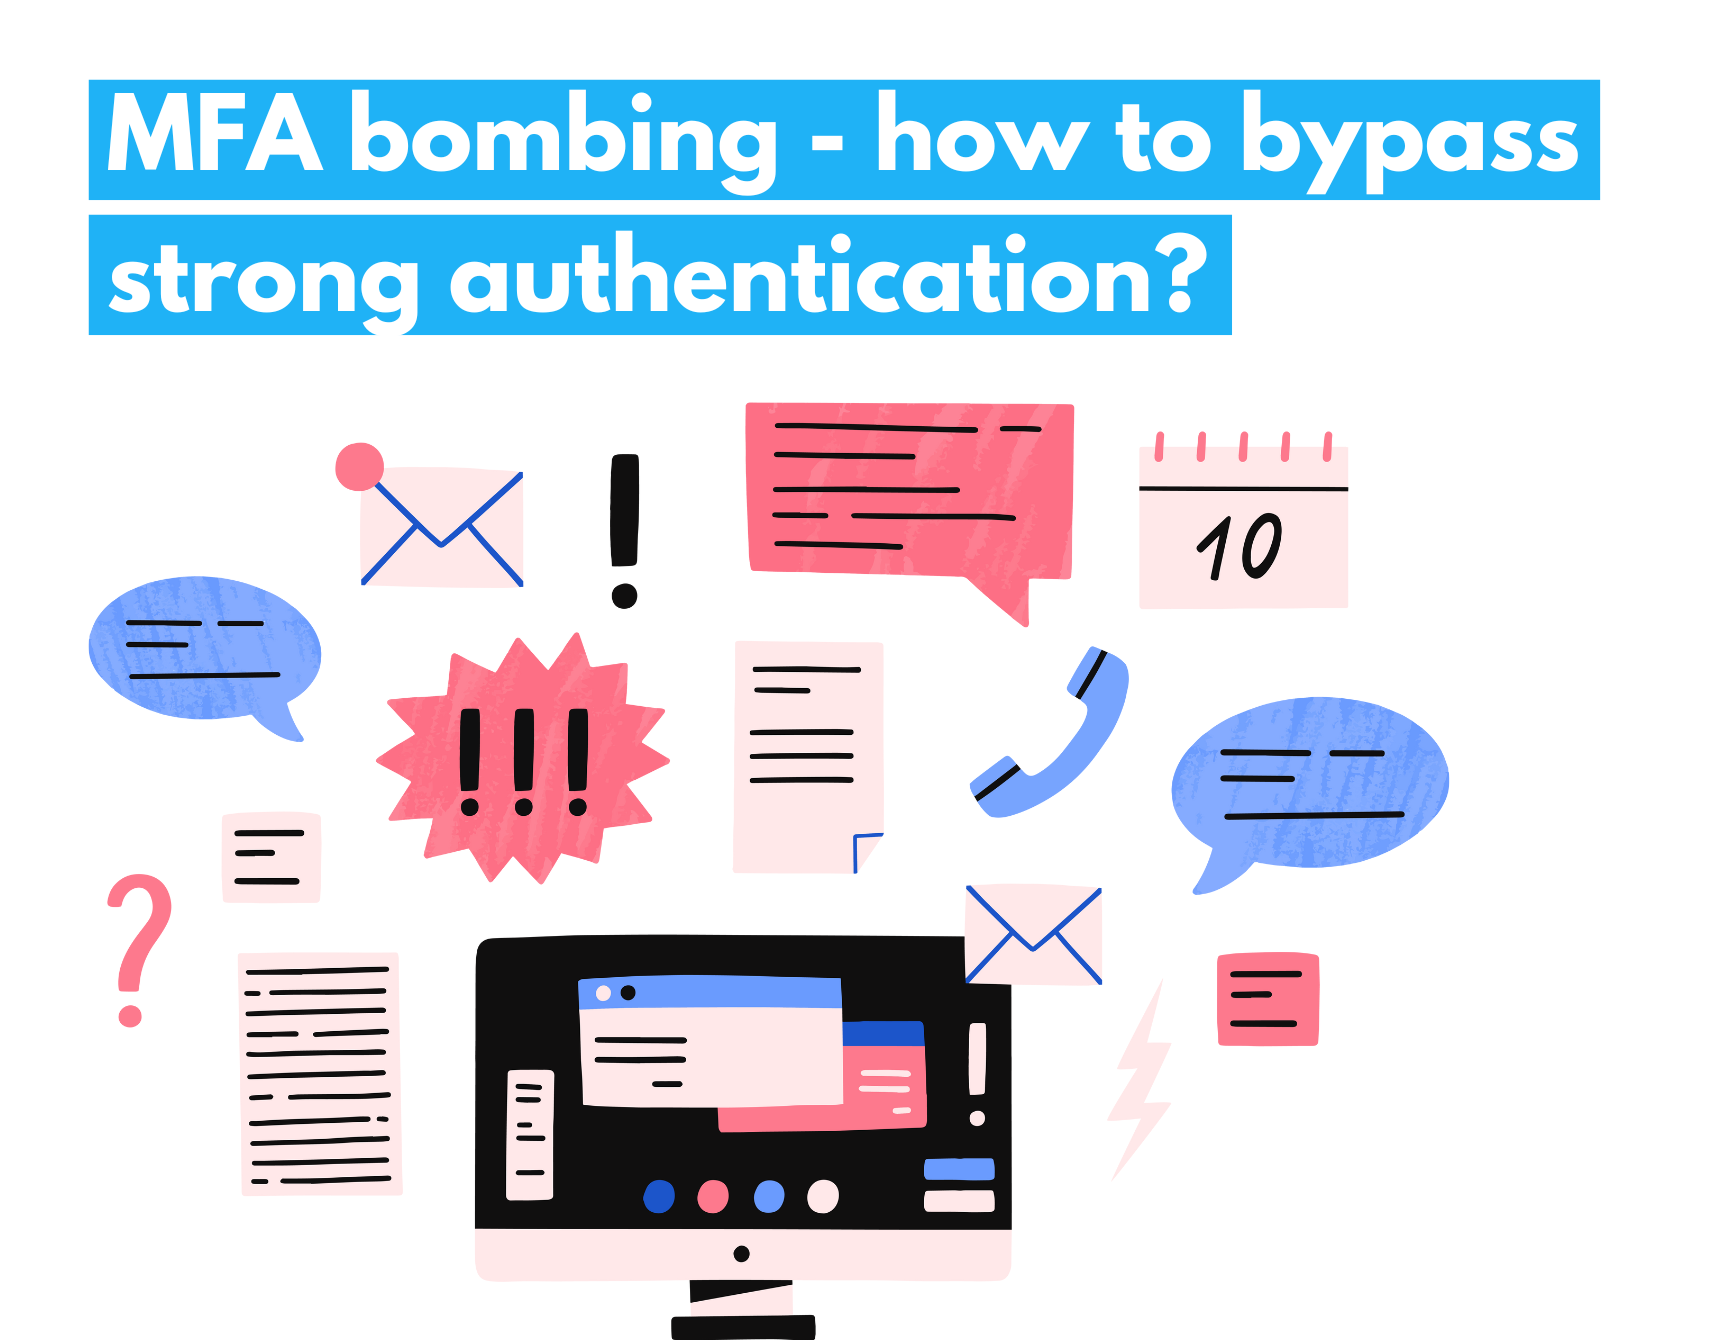 MFA bombing – how to bypass strong authentication?